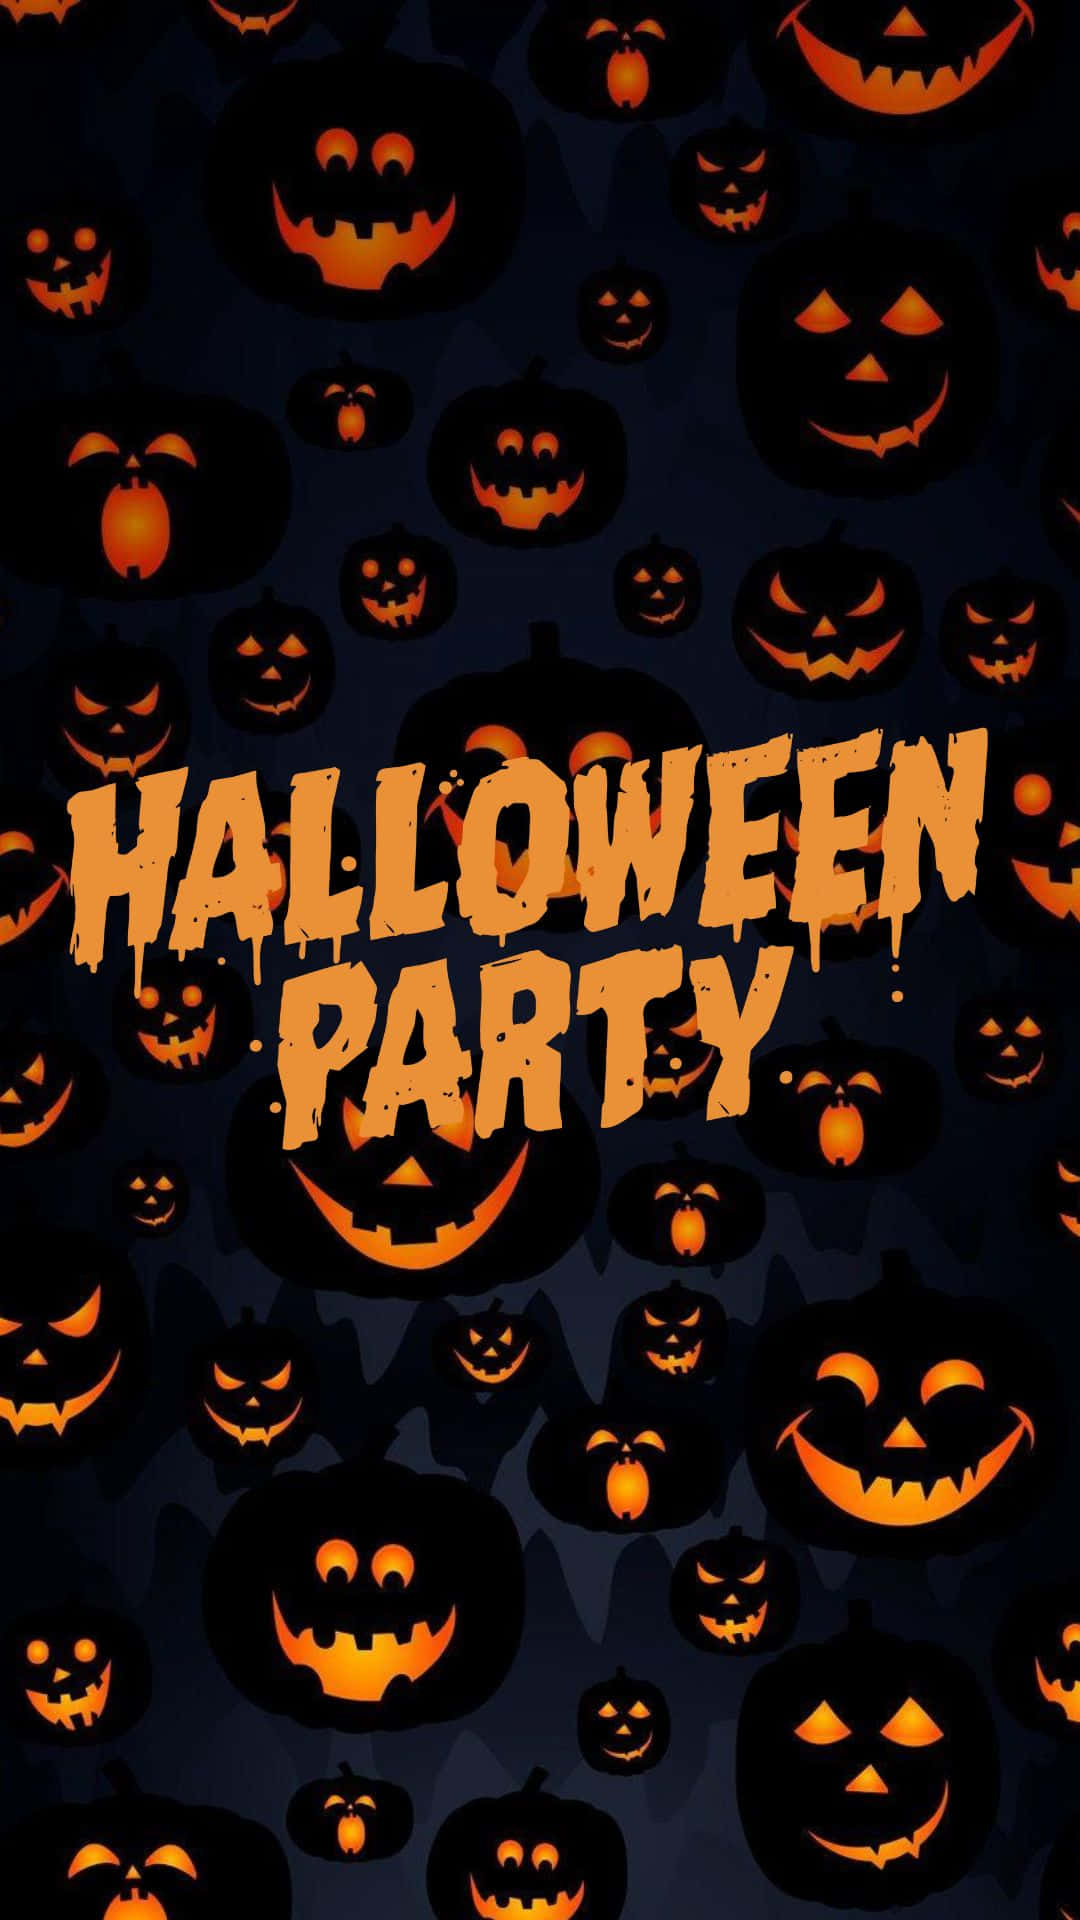 Join Us For a Spooktacular Halloween Party!